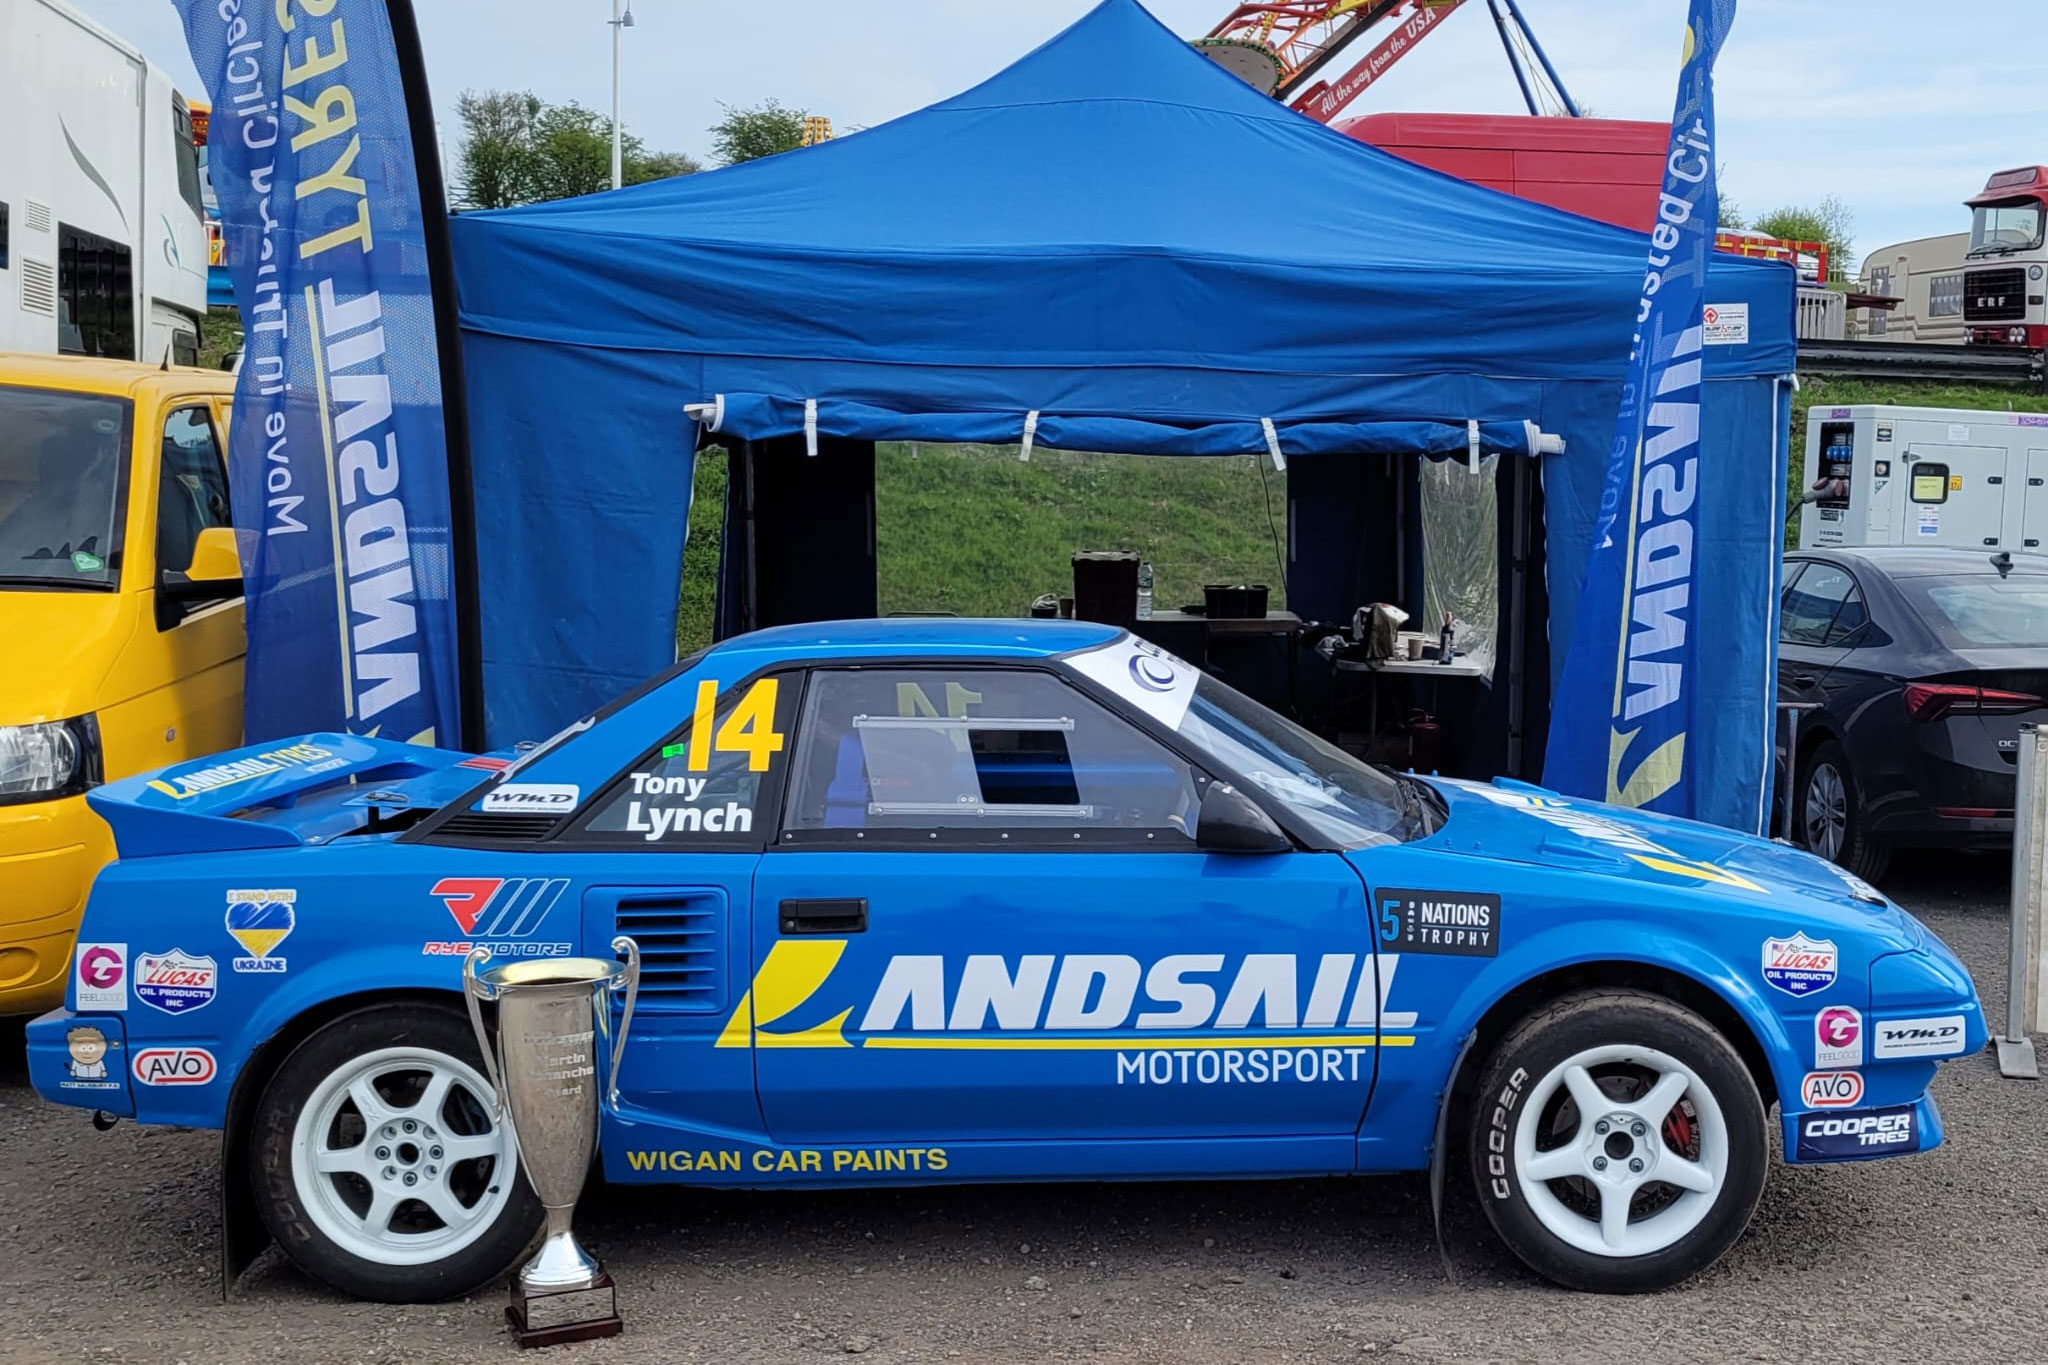 LTony Lynch and his Lucas Oil-sponsored MR2